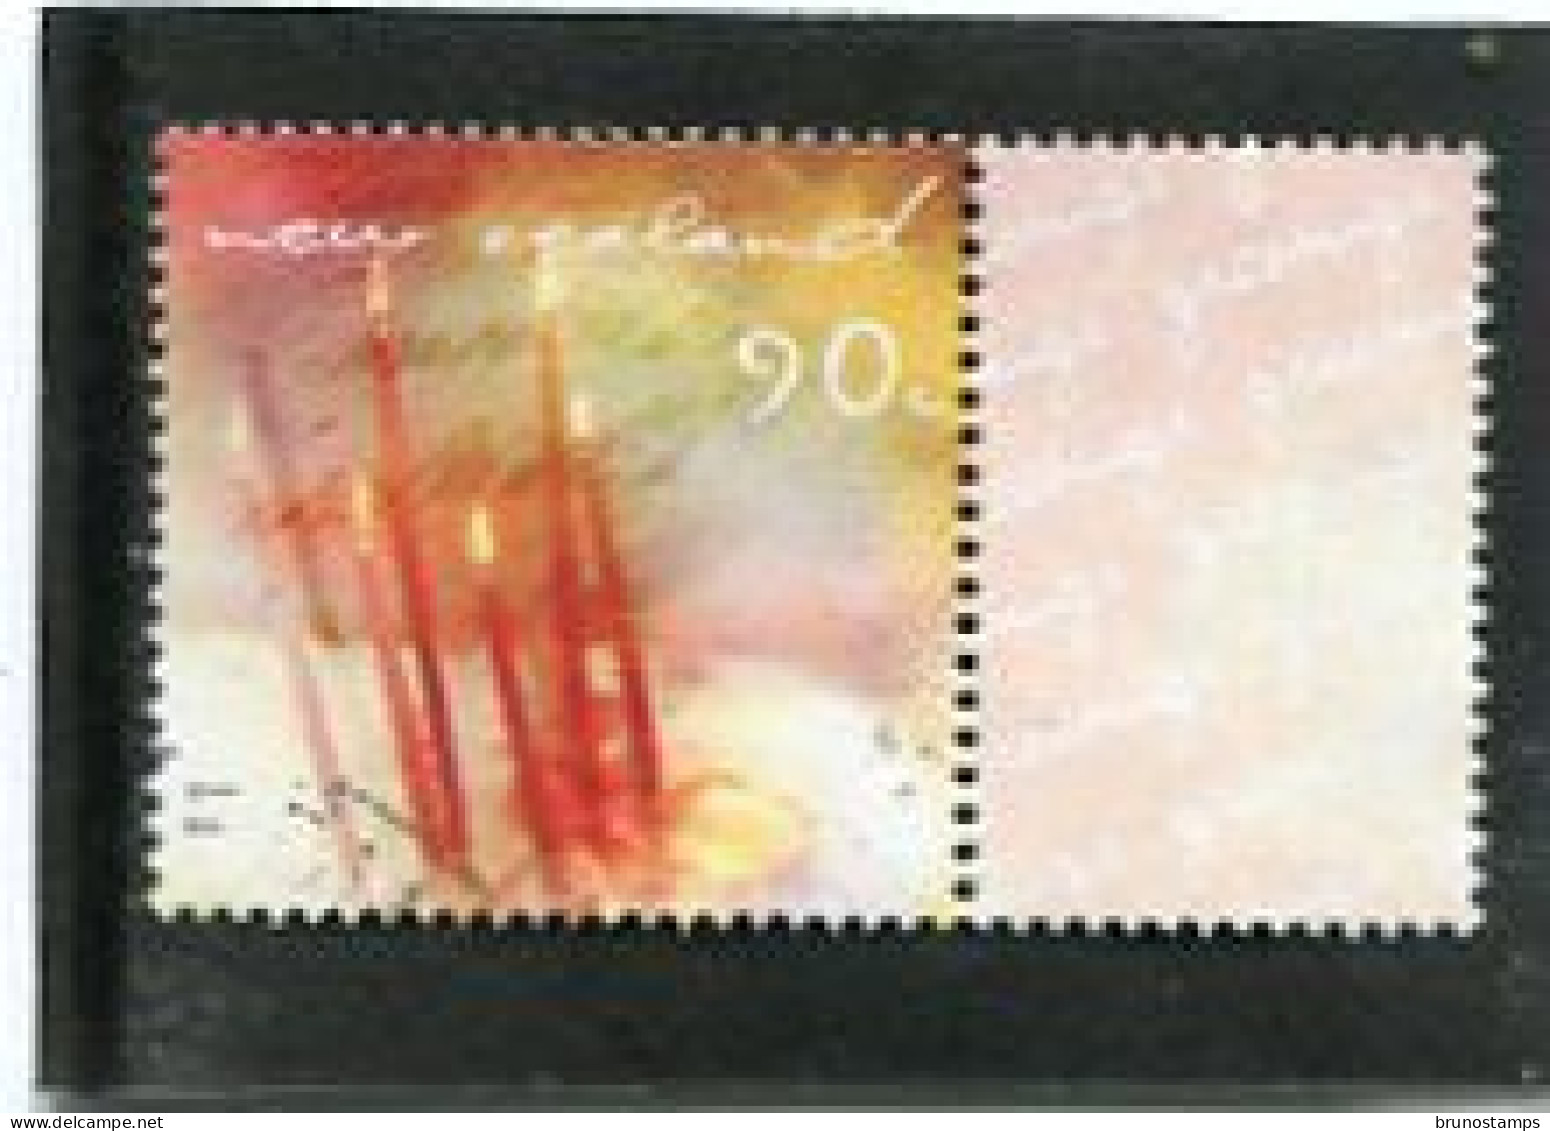 NEW ZEALAND - 2001  90c  GREETINGS  CANDLES  FINE  USED - Oblitérés